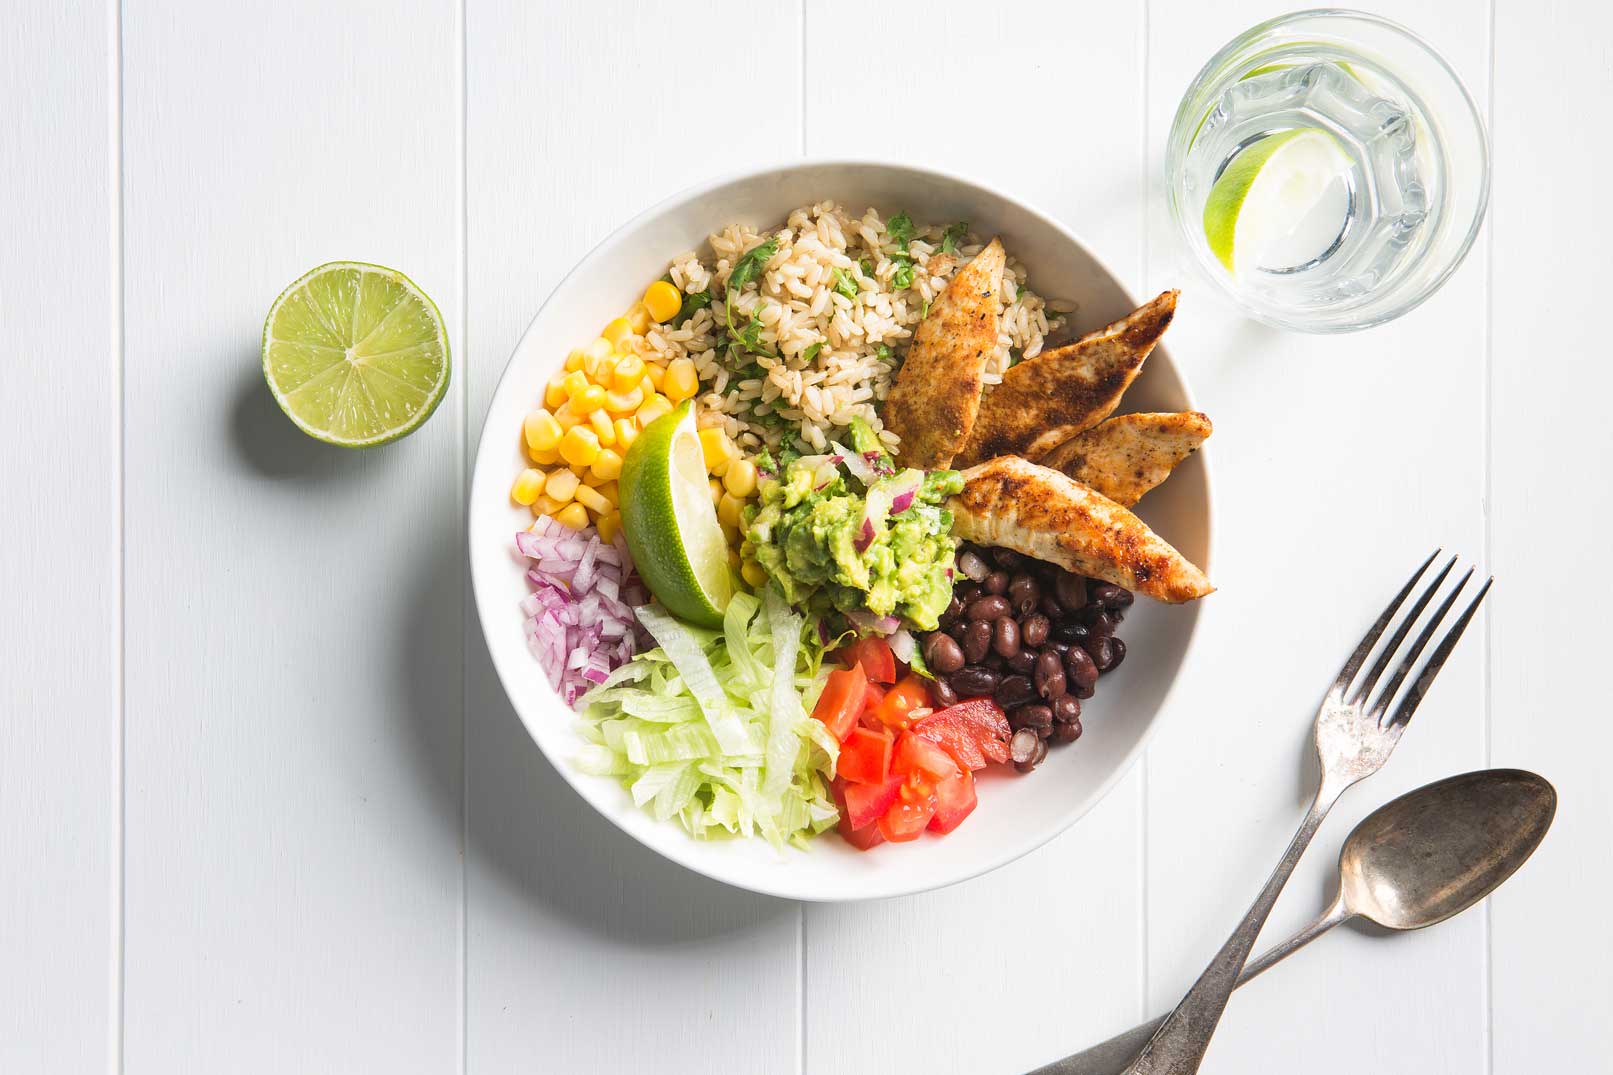 Image shot from above of a chicken burrito bowl with half a lime on the side, serving forks and a jug of water